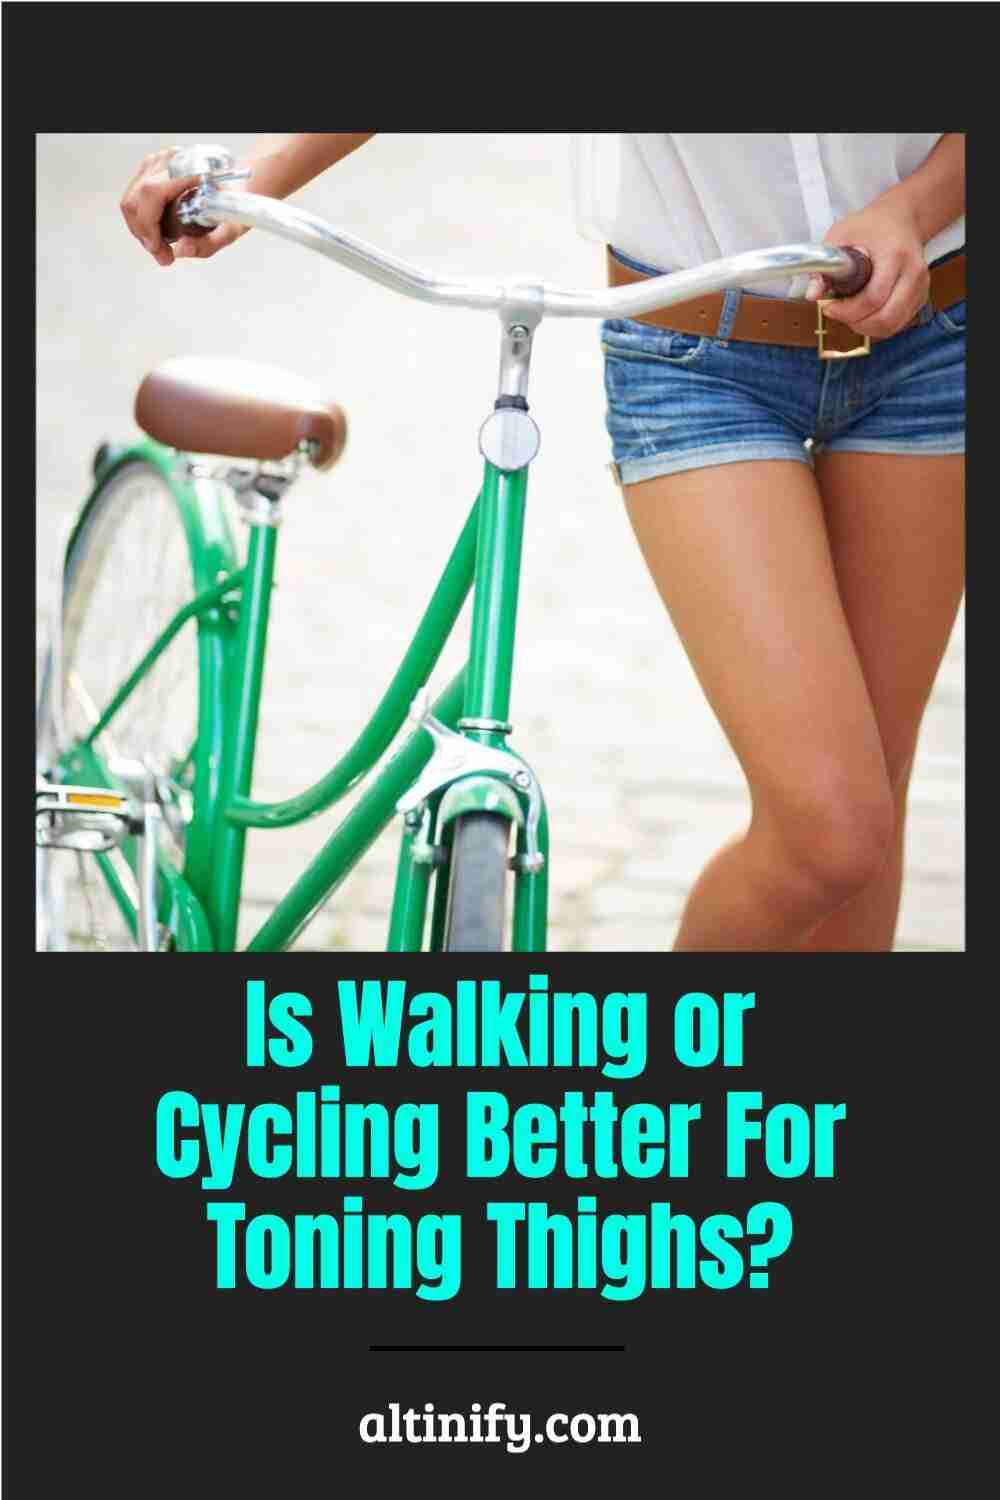 Is Walking or Cycling Better For Toning Thighs?